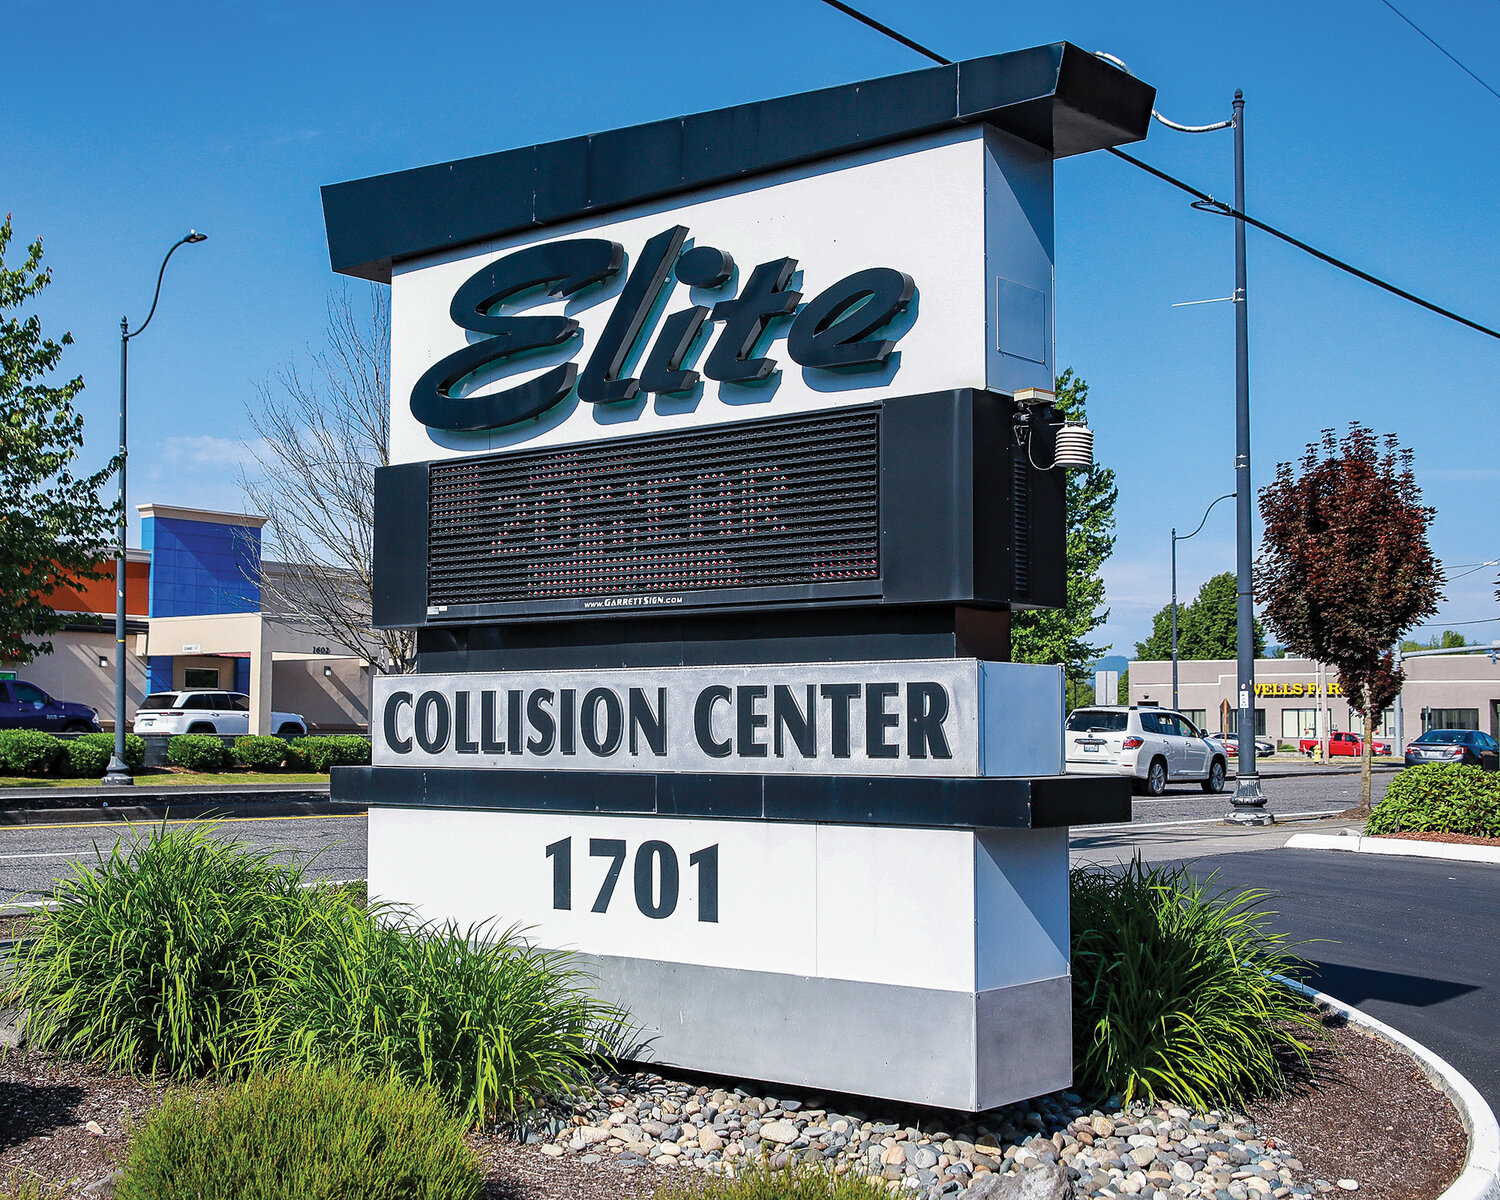 Elite Collision Center's sign off of Main Street in Battle Ground is seen showing its 20 year anniversary during the celebration on Wednesday, June 7.